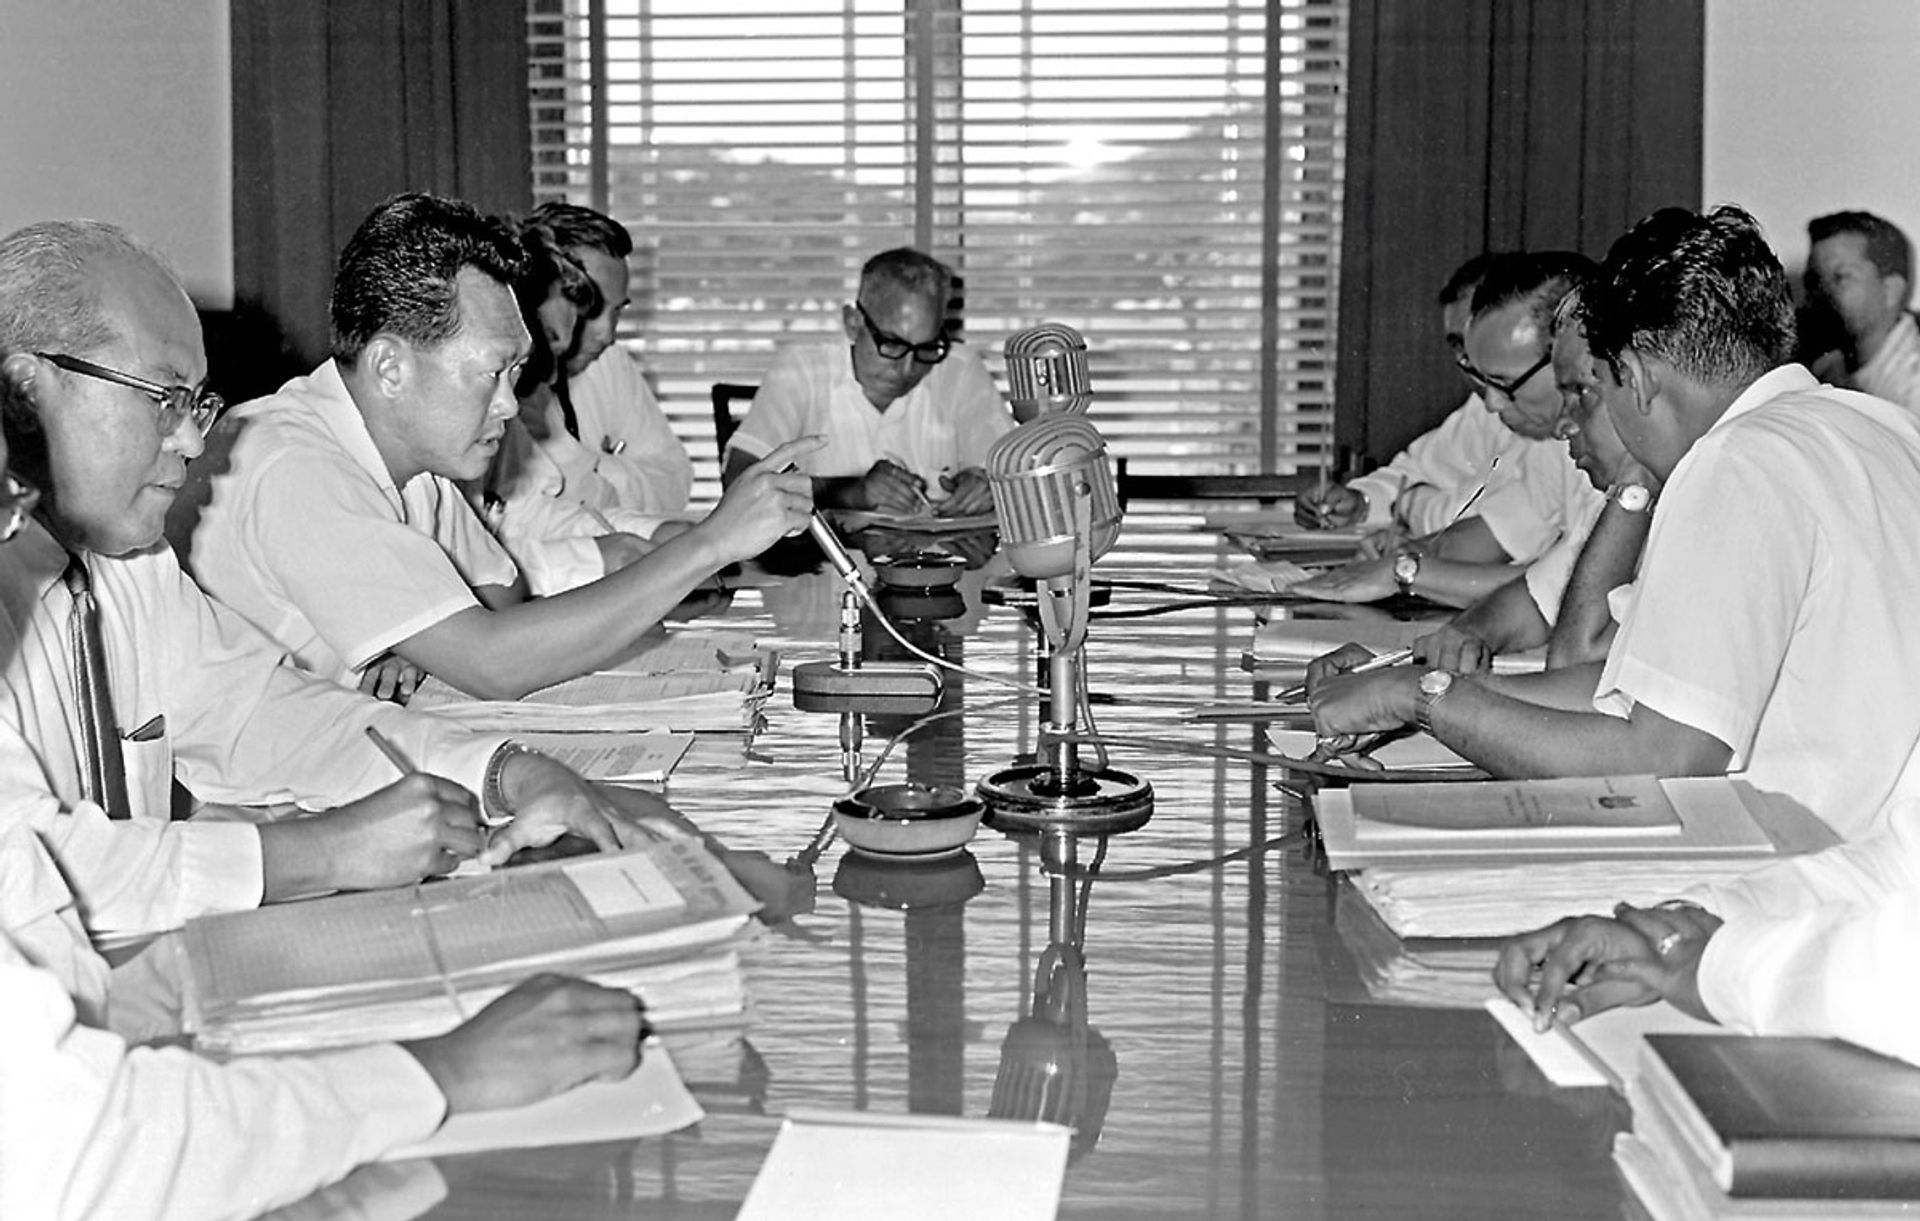 Mr Lee (second from left), seen here in a 1965 wage dispute meeting with leaders from two unions, continued to concern himself with workers’ issues after he became prime minister in 1959. But to lay the foundation for industrial peace, he introduced a law to restrict unions’ right to strike in 1968. Between July 1961 and September 1962, Singapore had a record 153 strikes. By 1969, for the first time since before the war, Singapore had no strikes or work stoppages. ST Photo: Low Yew Kong